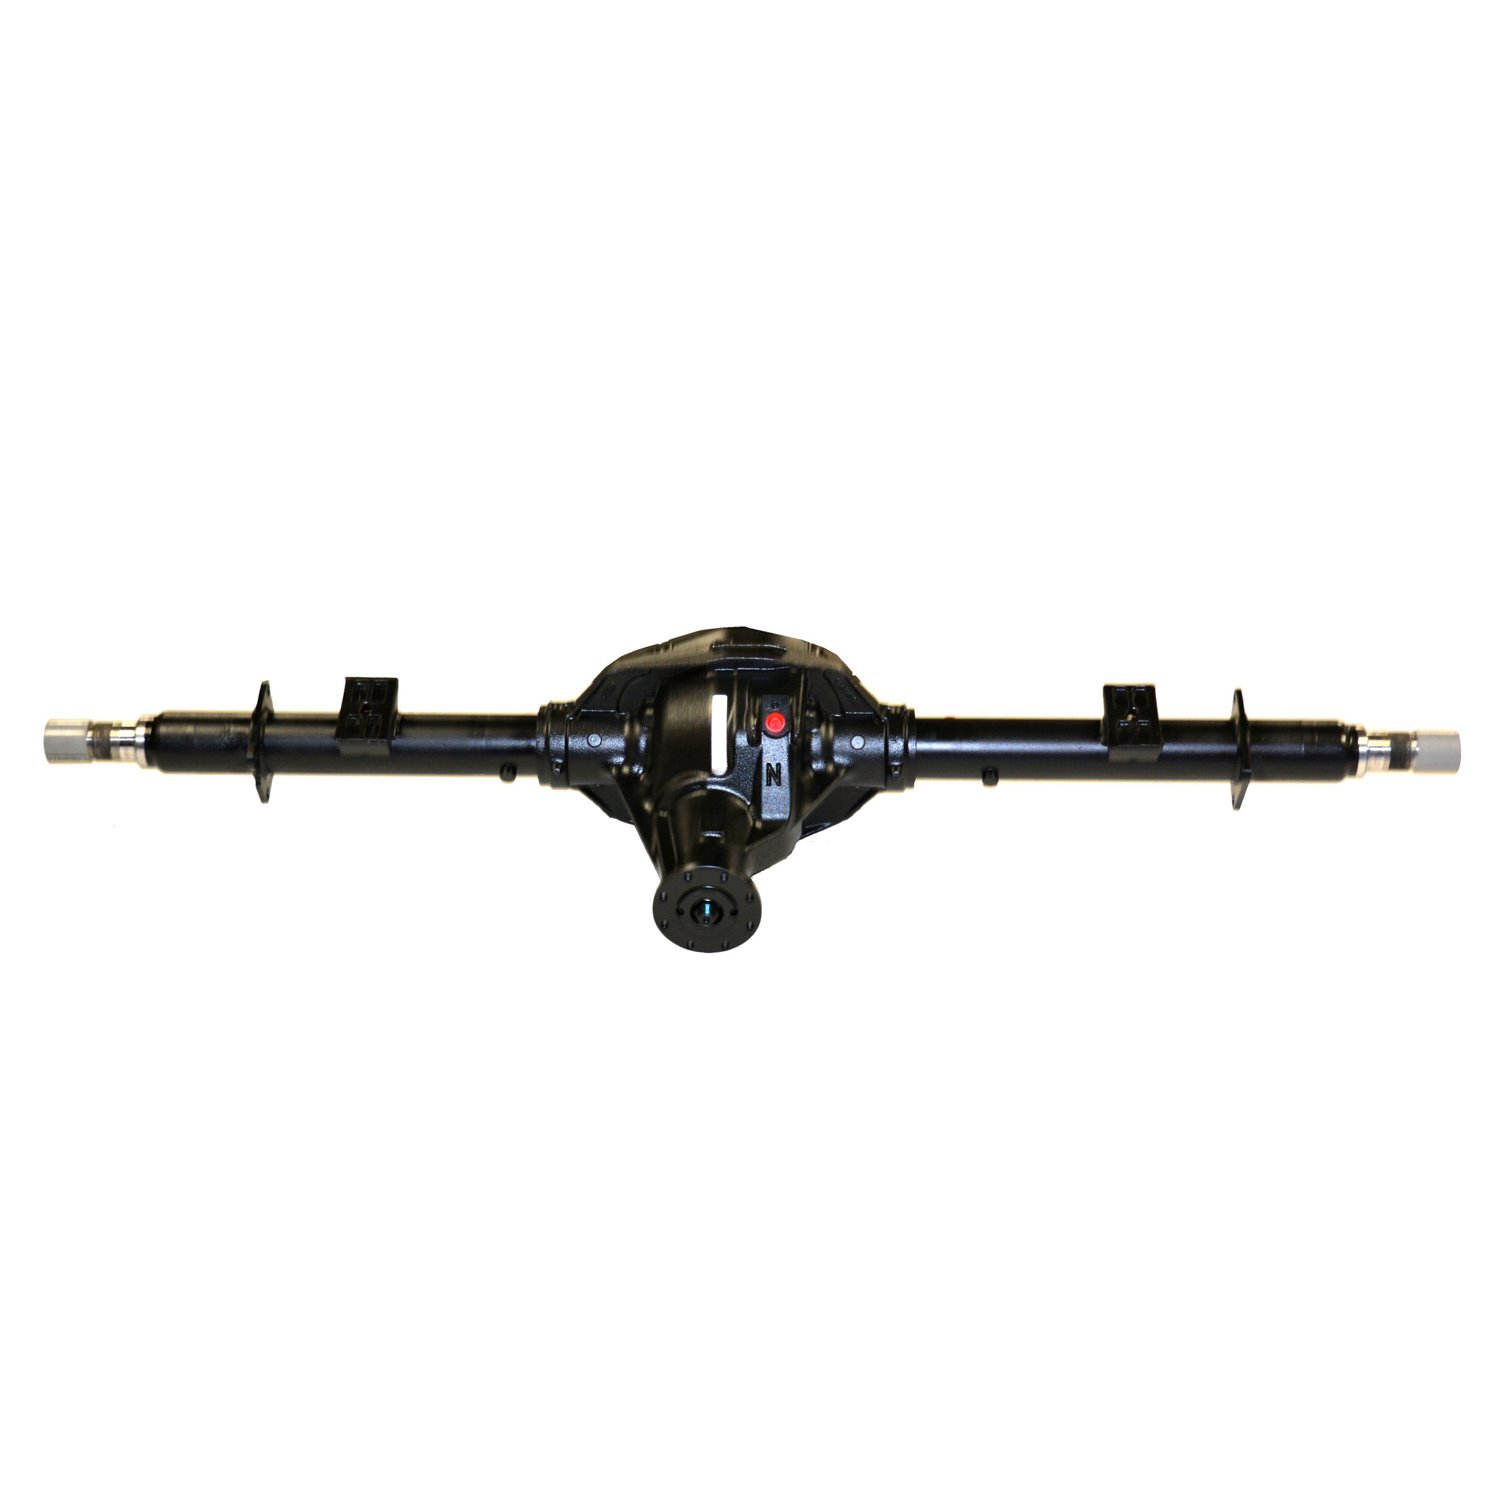 Remanufactured Complete Axle Assembly for 10.25" 87-97 F350 3.55 , ABS, DRW, Cab Chassis